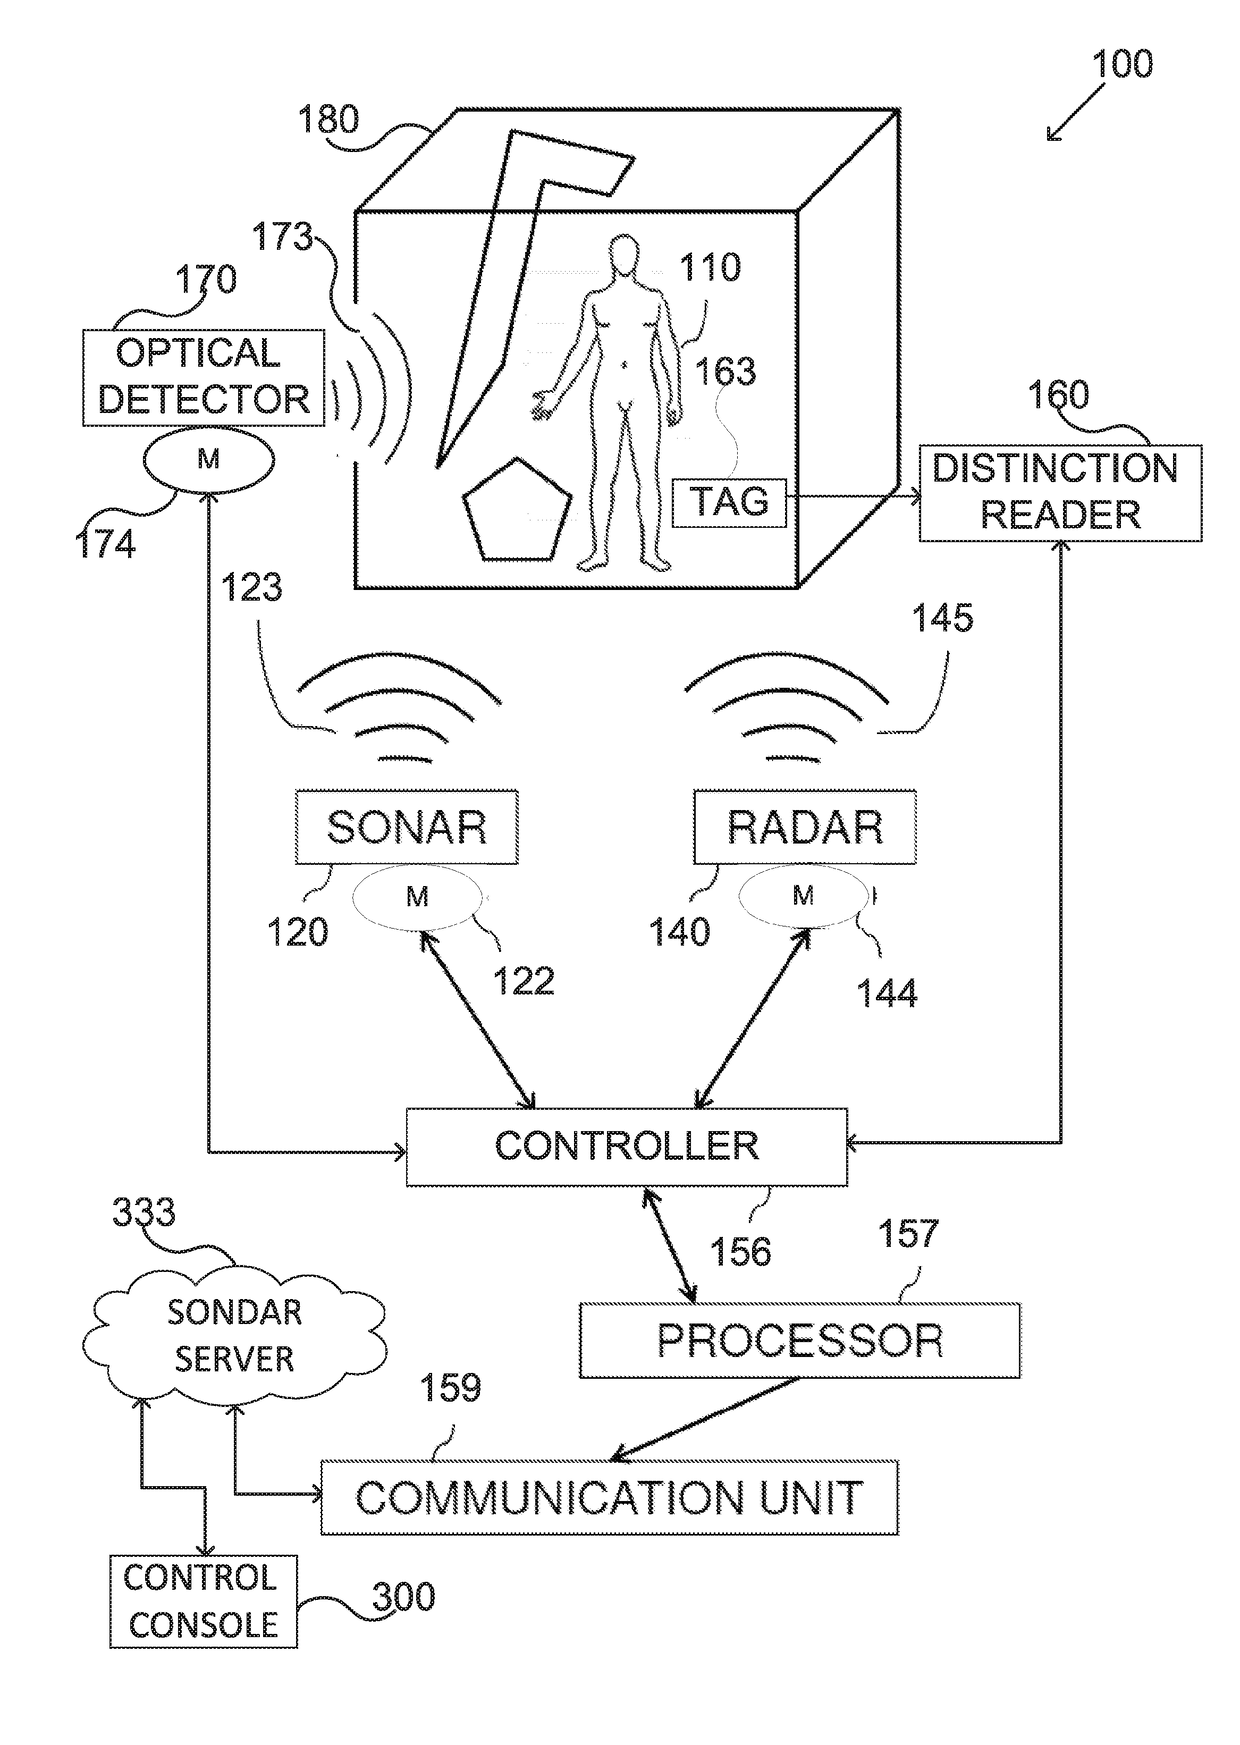 Remote monitoring system of human activity